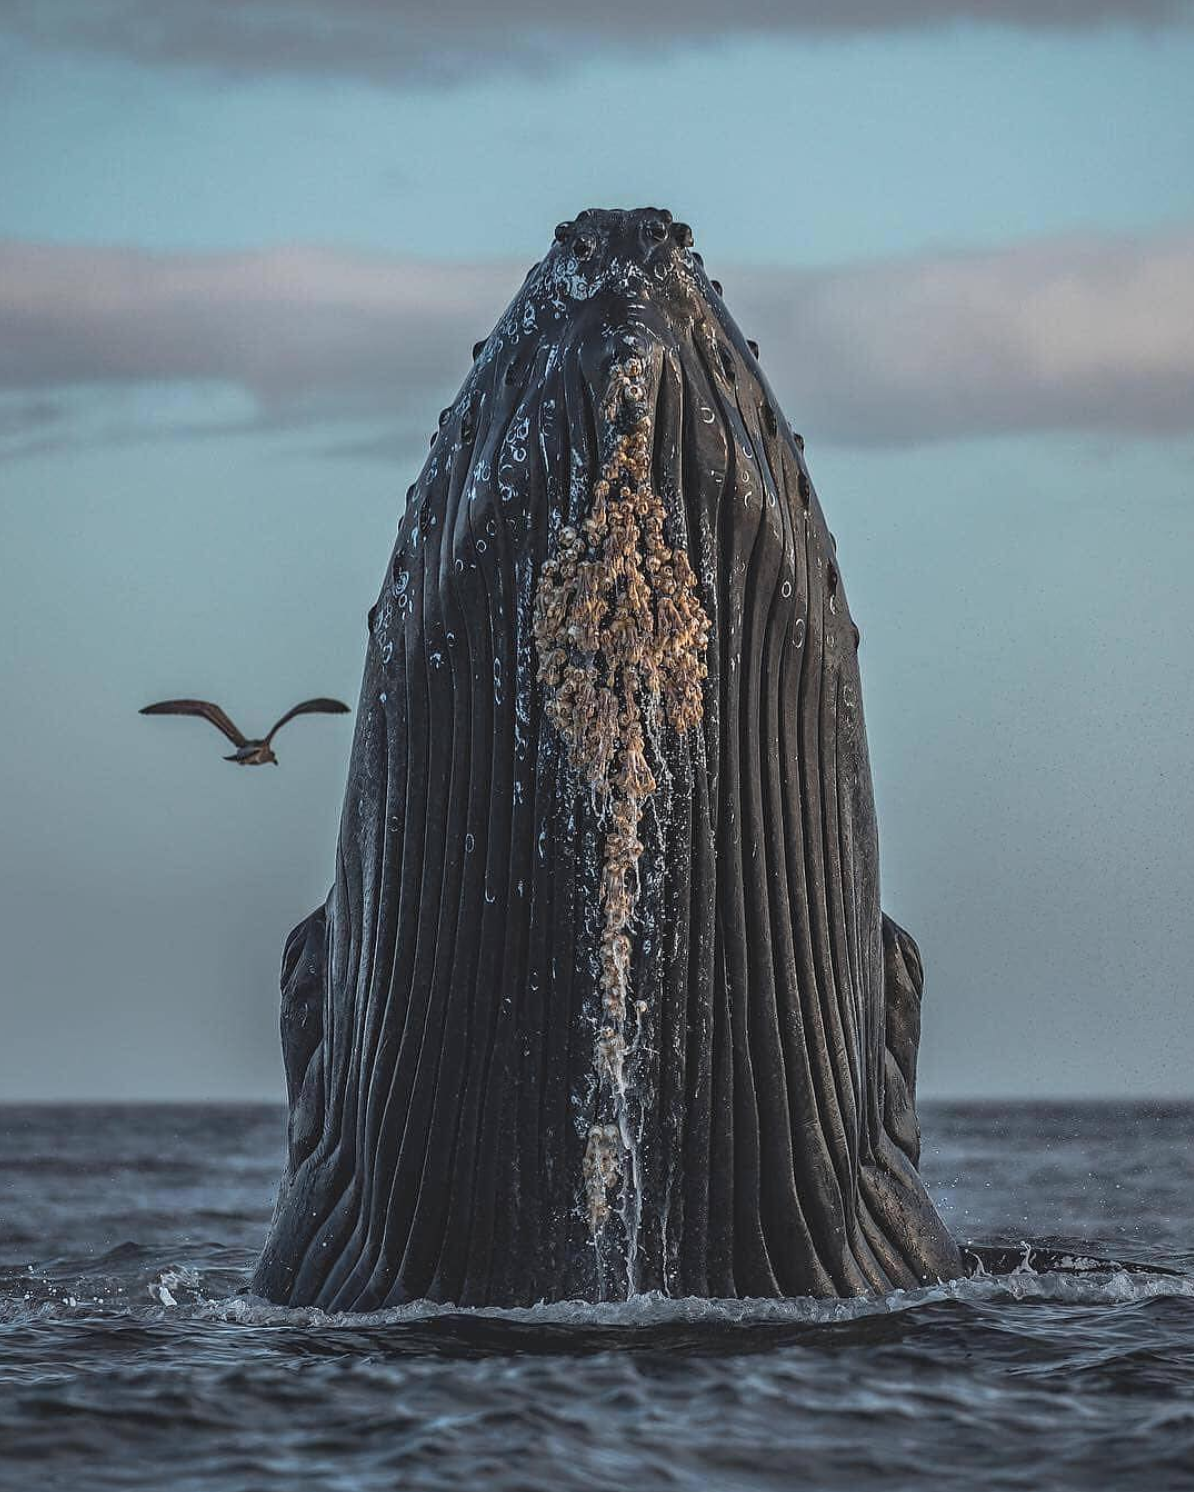 Humpback whale in all its glory - Whale, Nature, Ocean, Underwater world